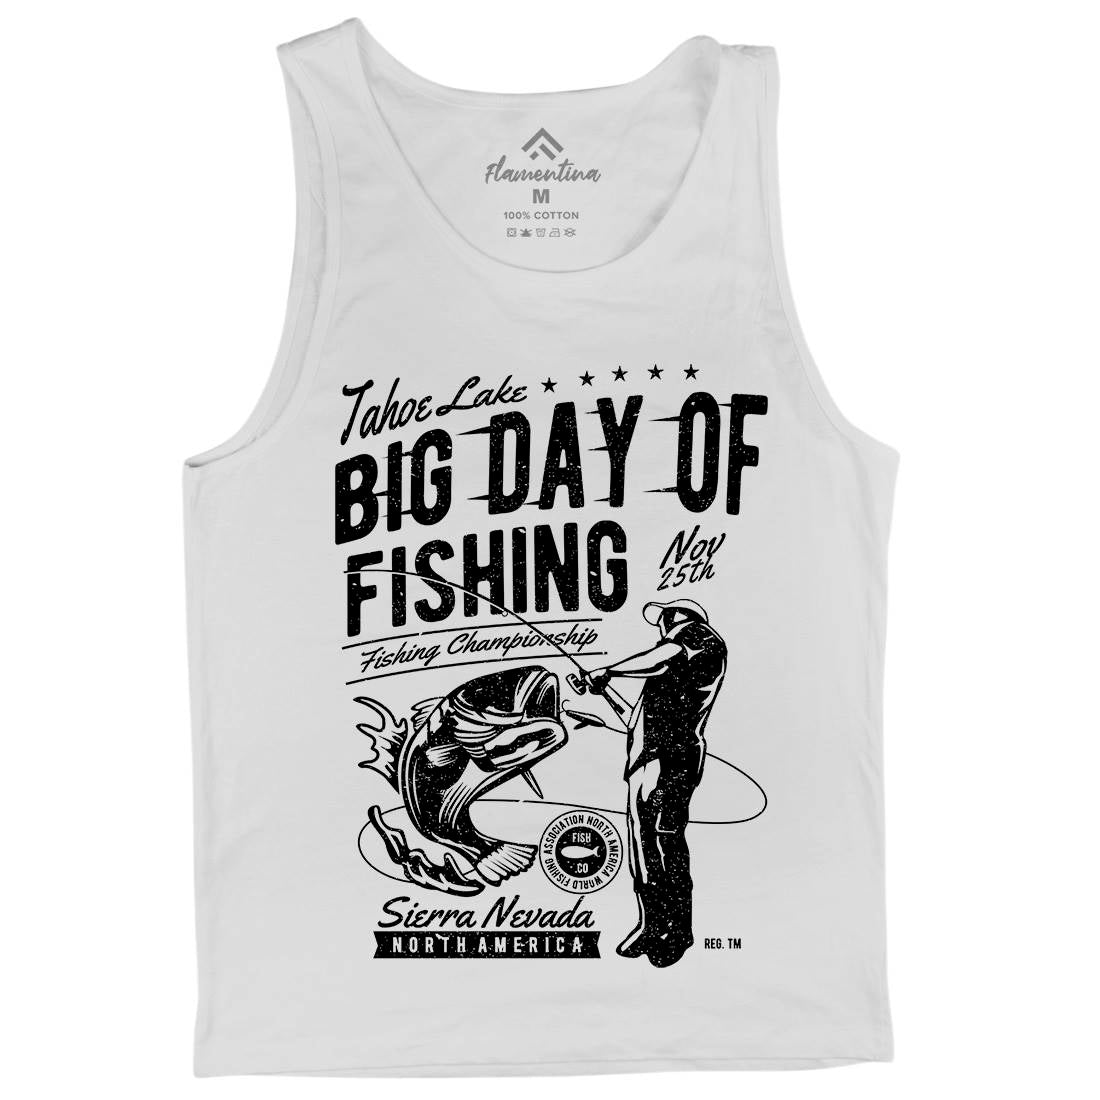 Big Day Of Mens Tank Top Vest Fishing A618